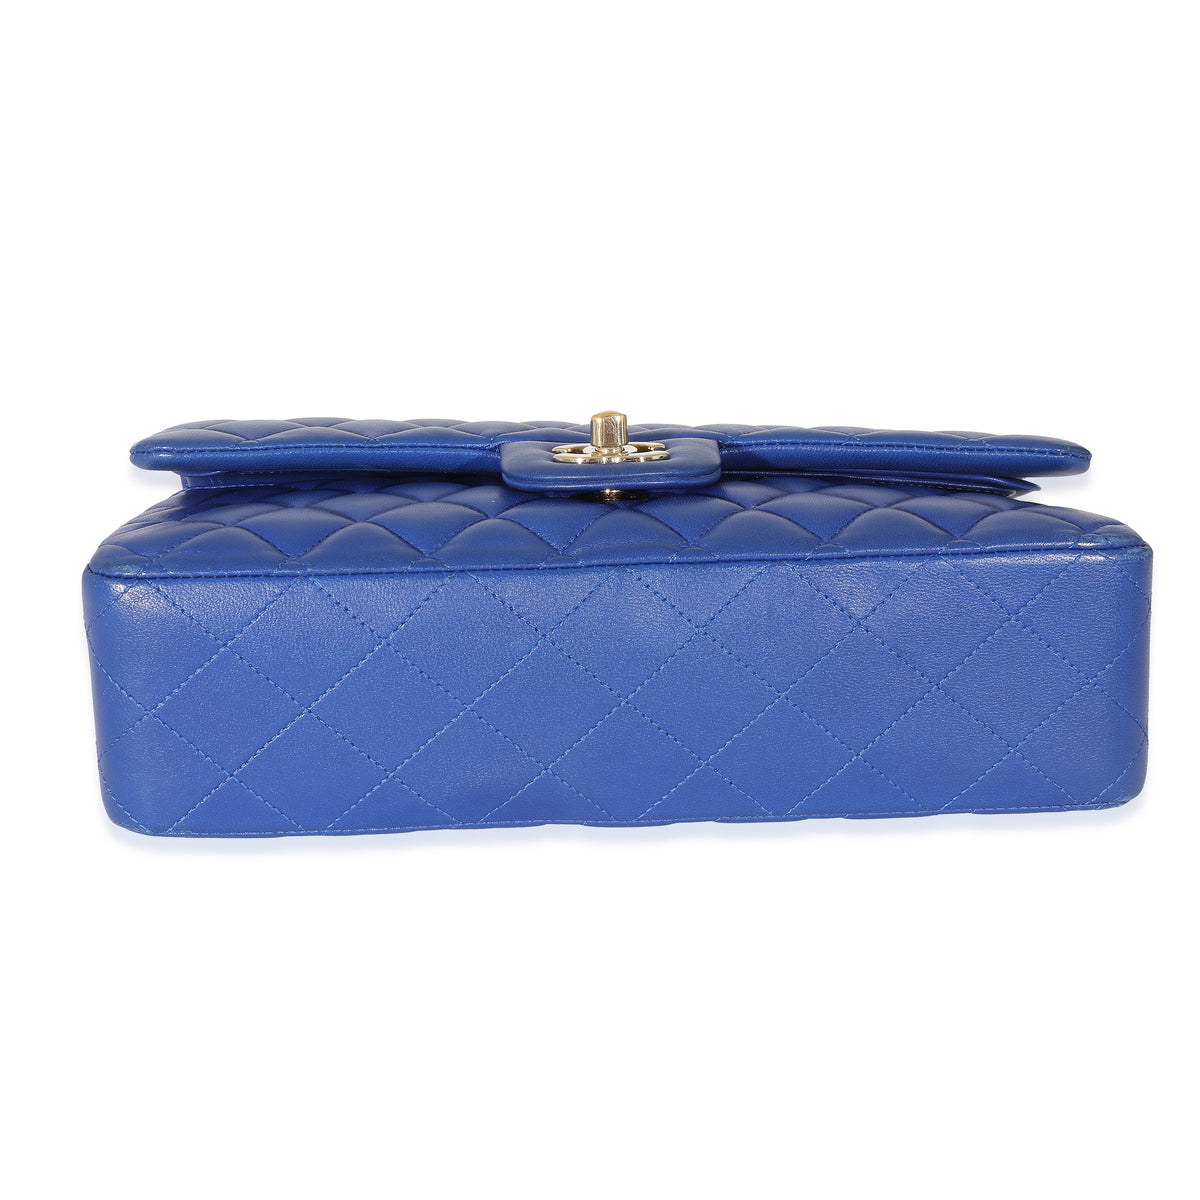 Chanel Jumbo Classic Flap Bag in Royal Blue Lambskin with silver hardware  sale at USD 348. Free International Shipping. View d…